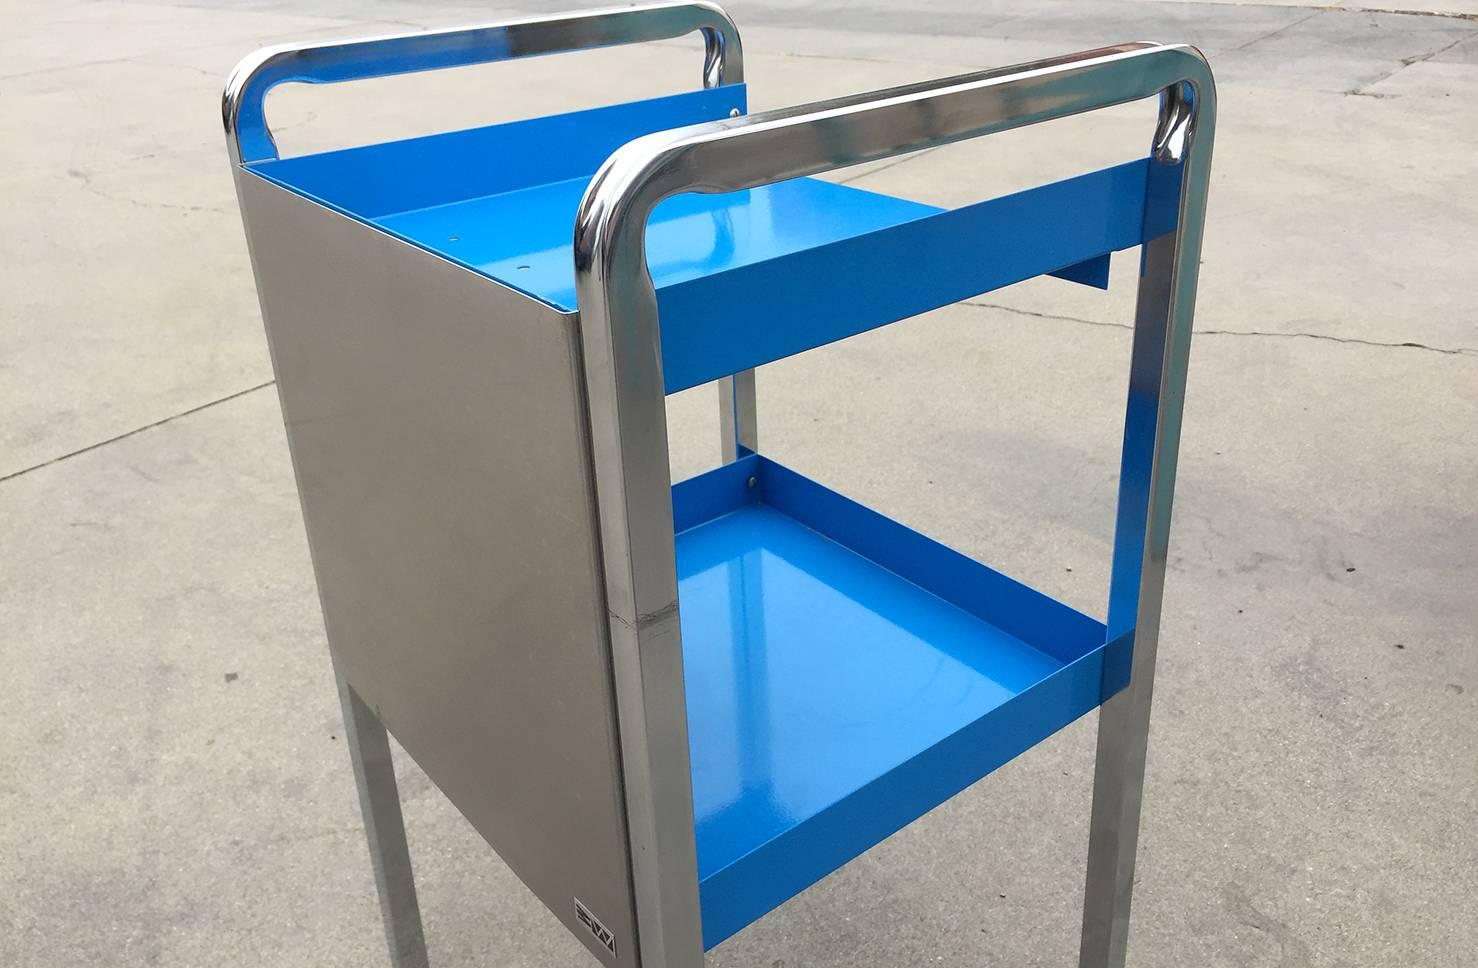 Retro steel medical cart refinished in high gloss powder coated blue and stainless steel. Put this unique piece to use as a bar cart, bathroom storage solution or nightstand, it’s versatile and quality-made. Excellent refinished